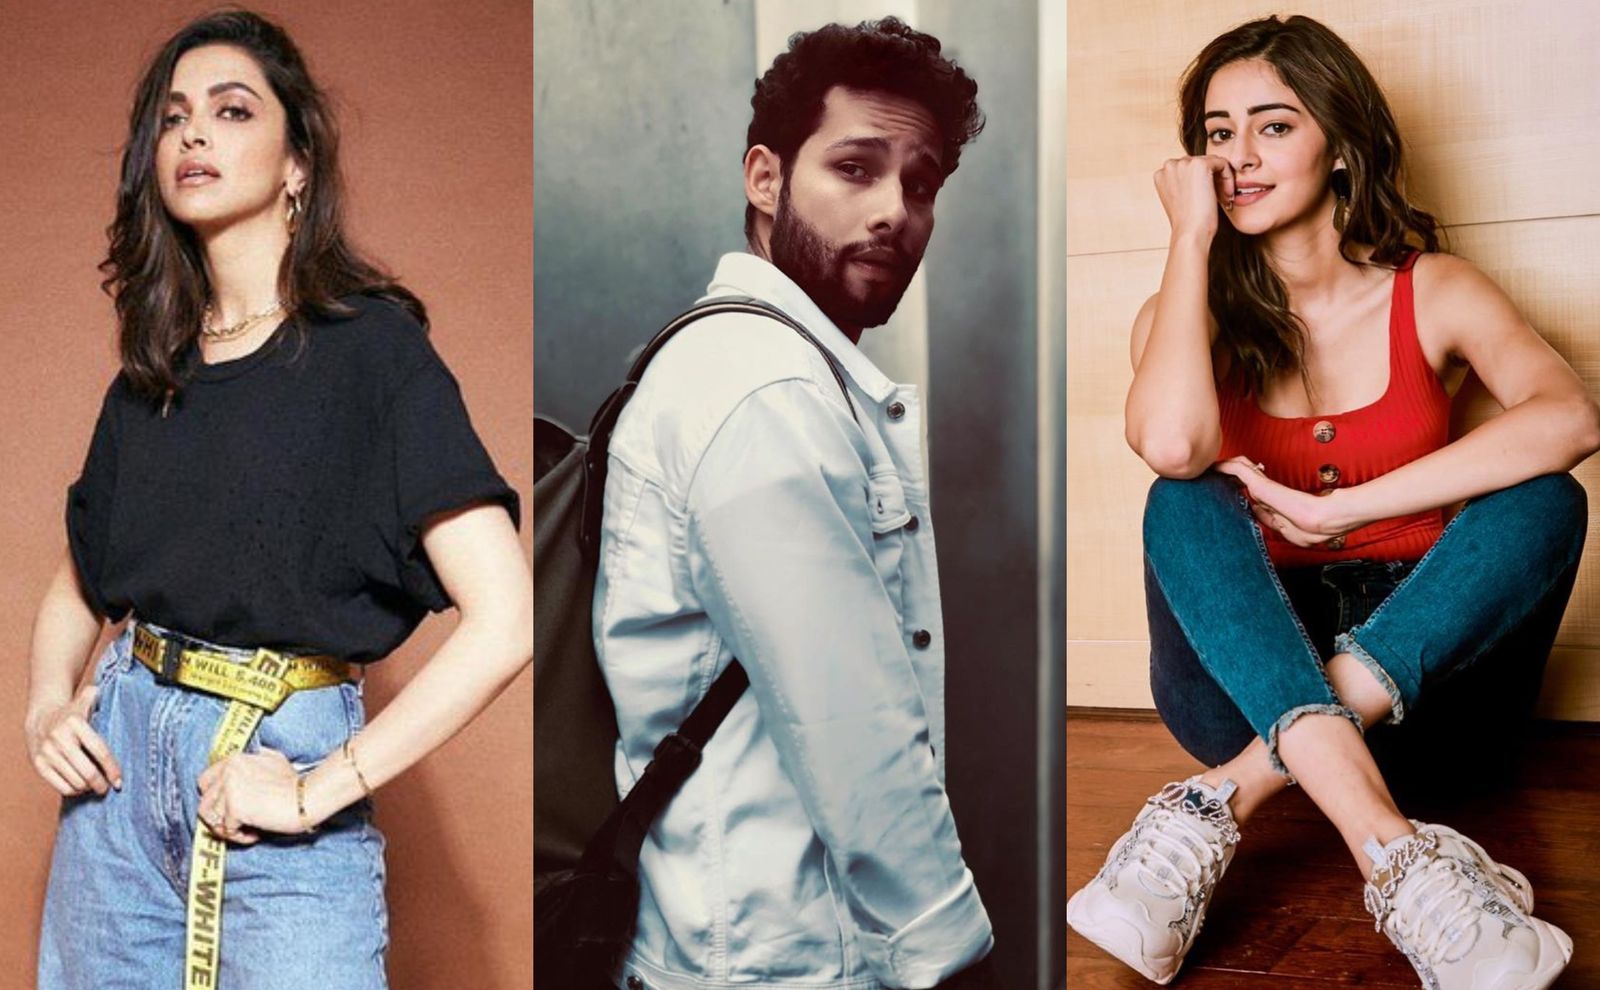 Deepika Padukone, Siddhant Chaturvedi And Ananya Panday To Star In Shakun Batra's Next, To Release On Valentine's Day 2021